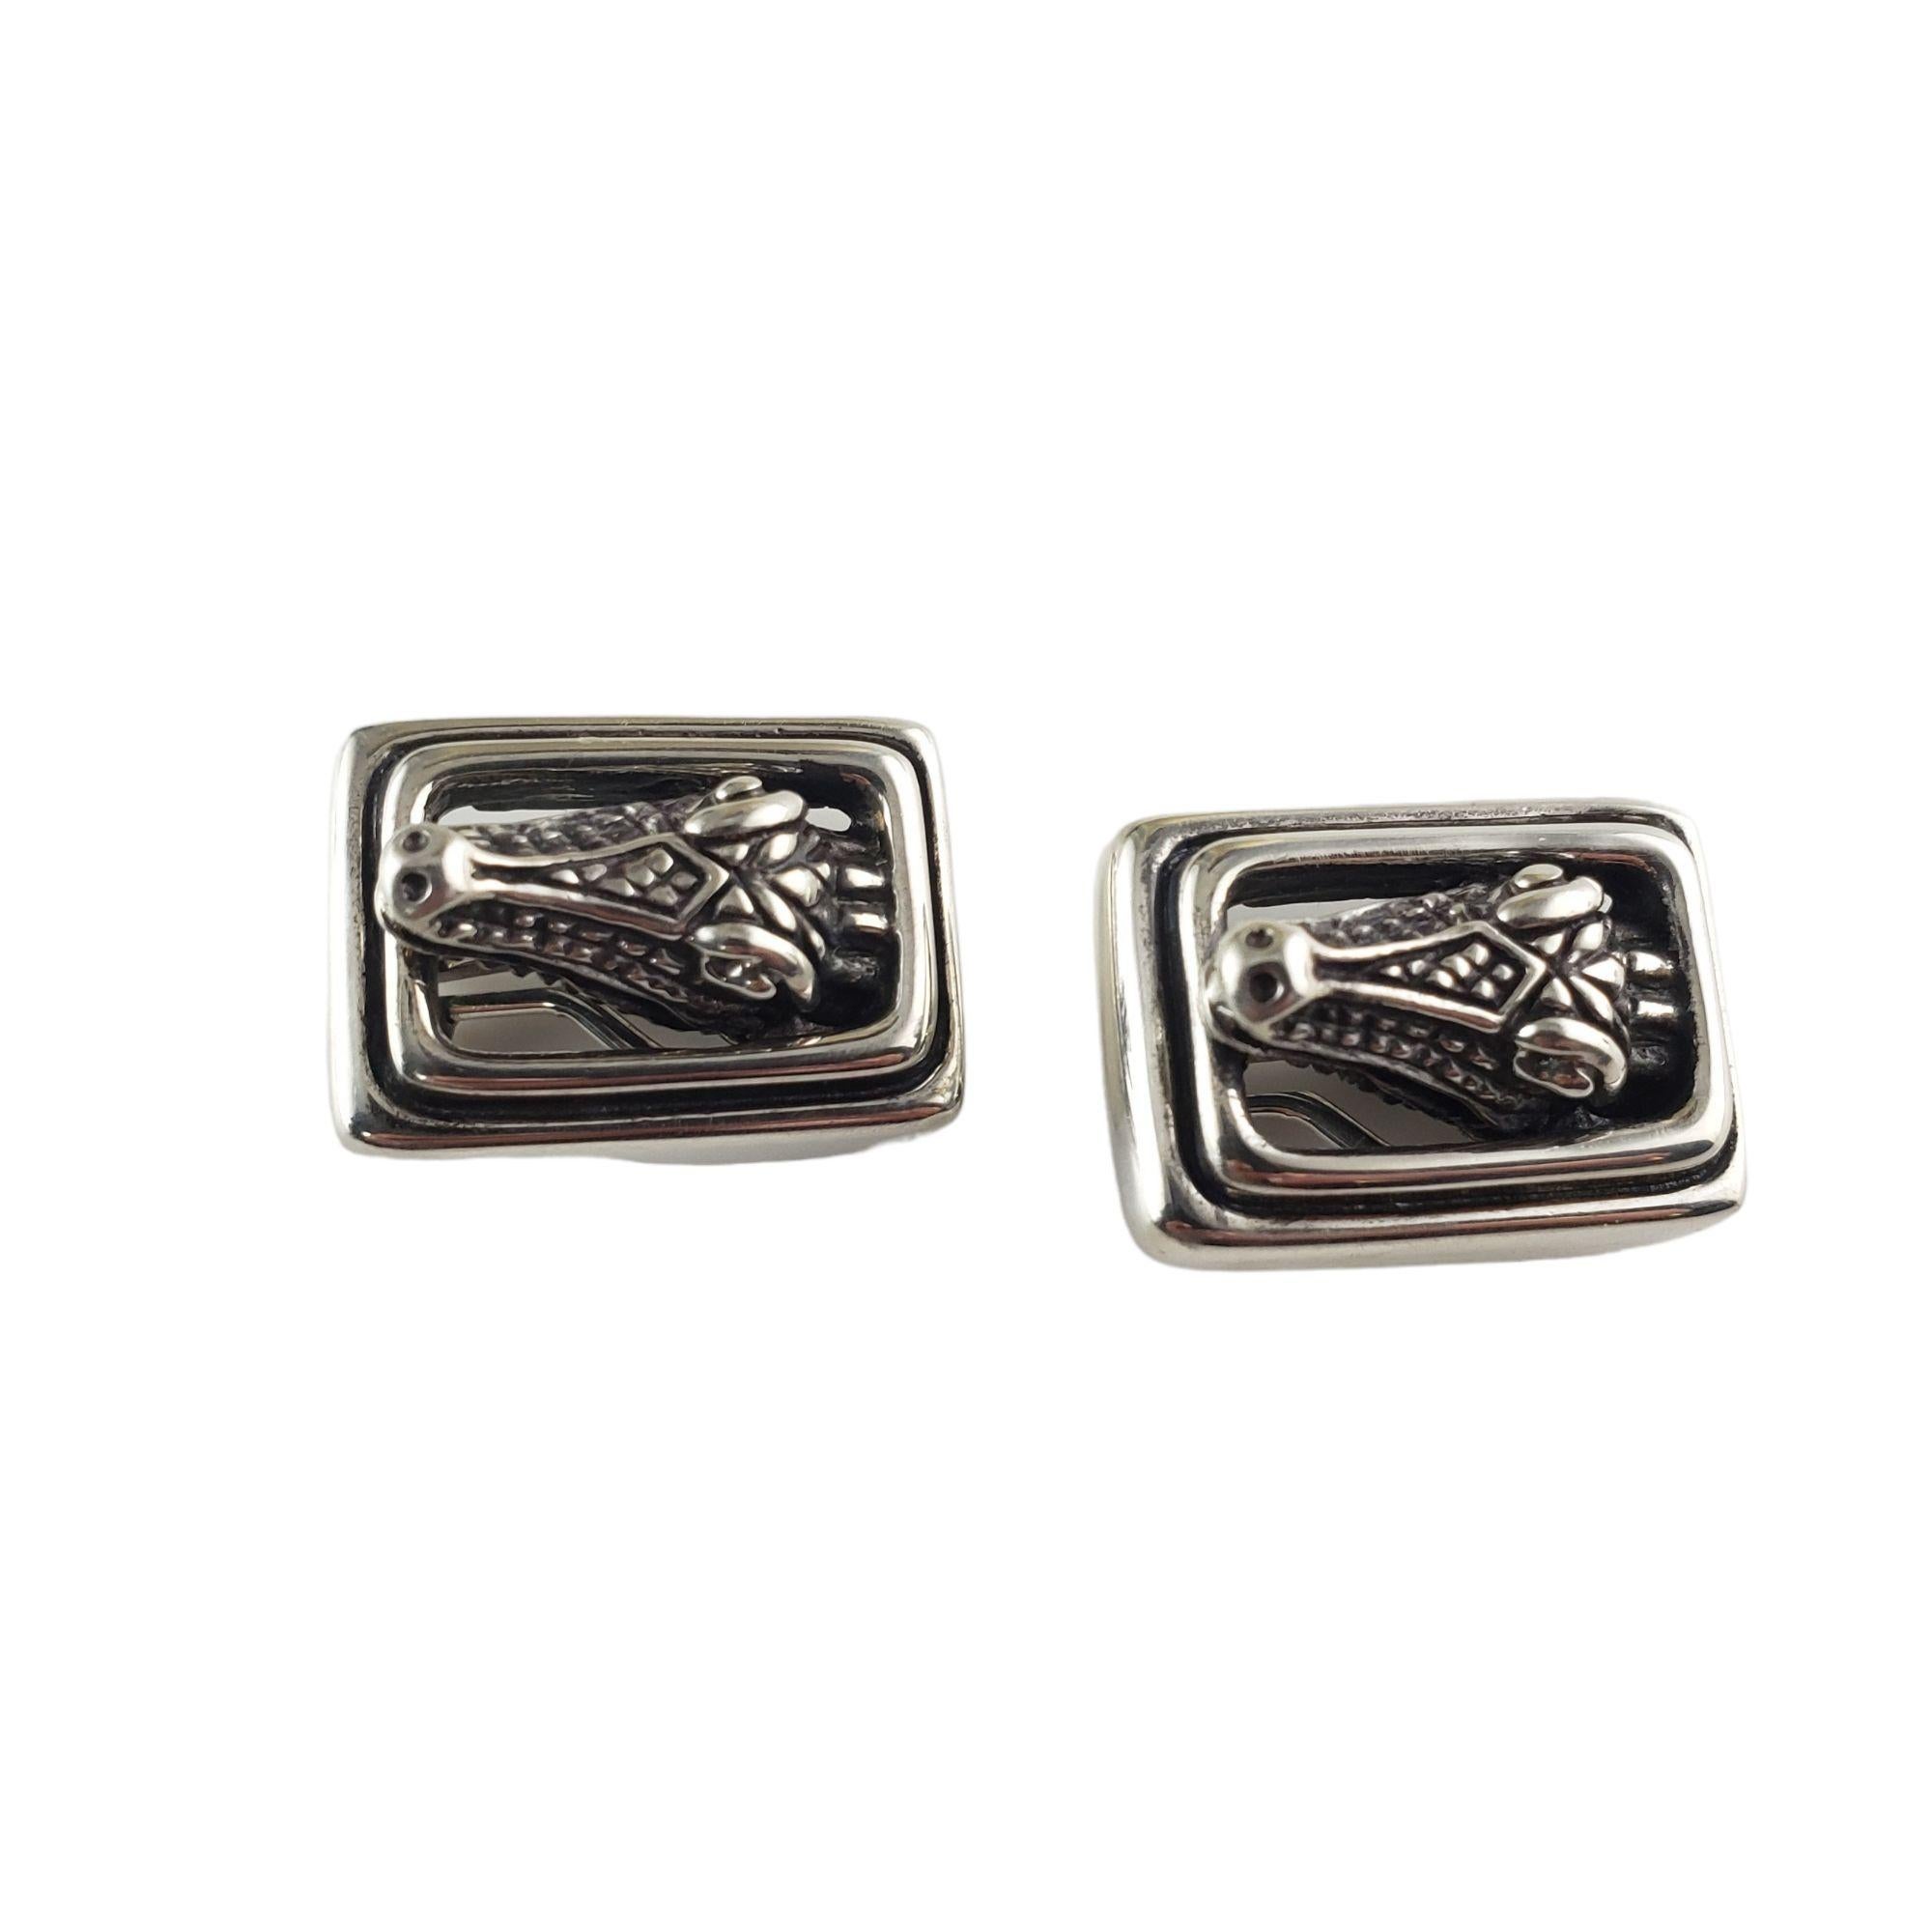 Vintage Kieselstein-Cord Sterling Silver Alligator Clip OnEarrings-

These elegant alligator earrings by Kieselstein-Cord are crafted in meticulously detailed sterling silver.  Omega back closures.

Size:  20 mm x 15 mm

Weight:  19.0 gr./  12.2